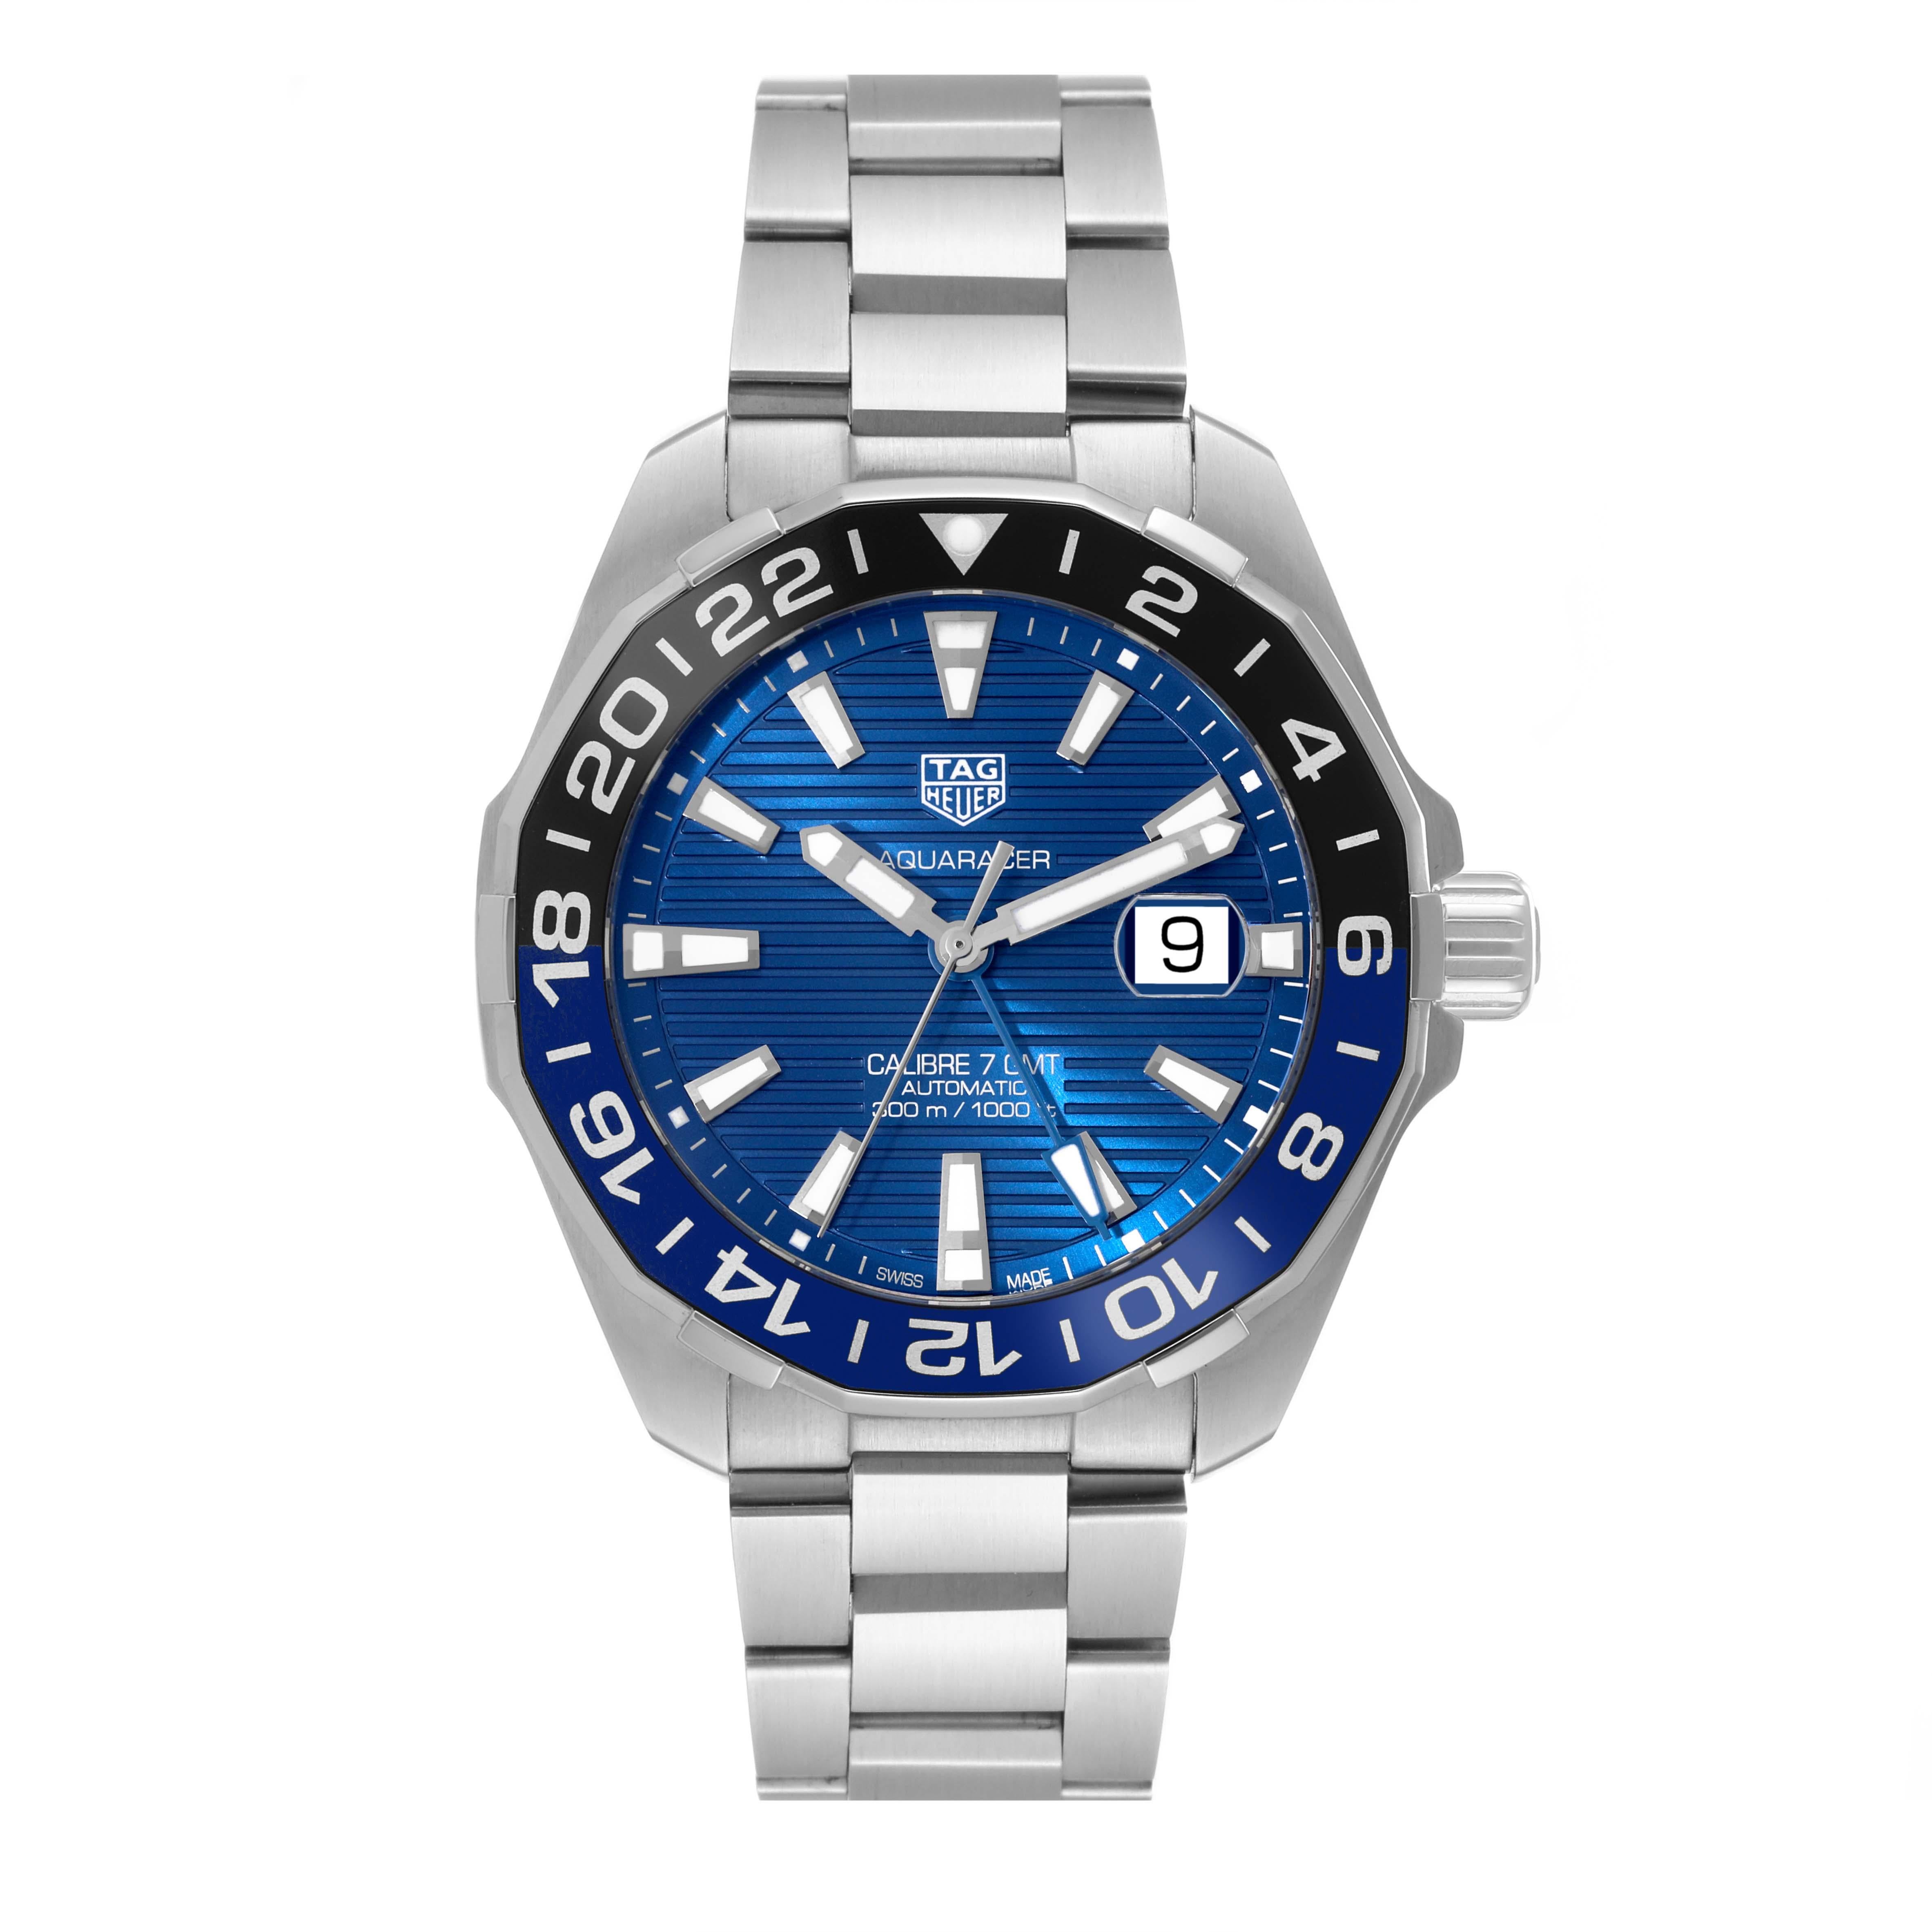 Tag Heuer Aquaracer Blue Dial Steel Mens Watch WAY201T. Automatic self-winding movement. Stainless steel case 43.0 mm in diameter. Stainless steel blue and black bidirectional rotating bezel. Scratch resistant sapphire crystal with cyclops